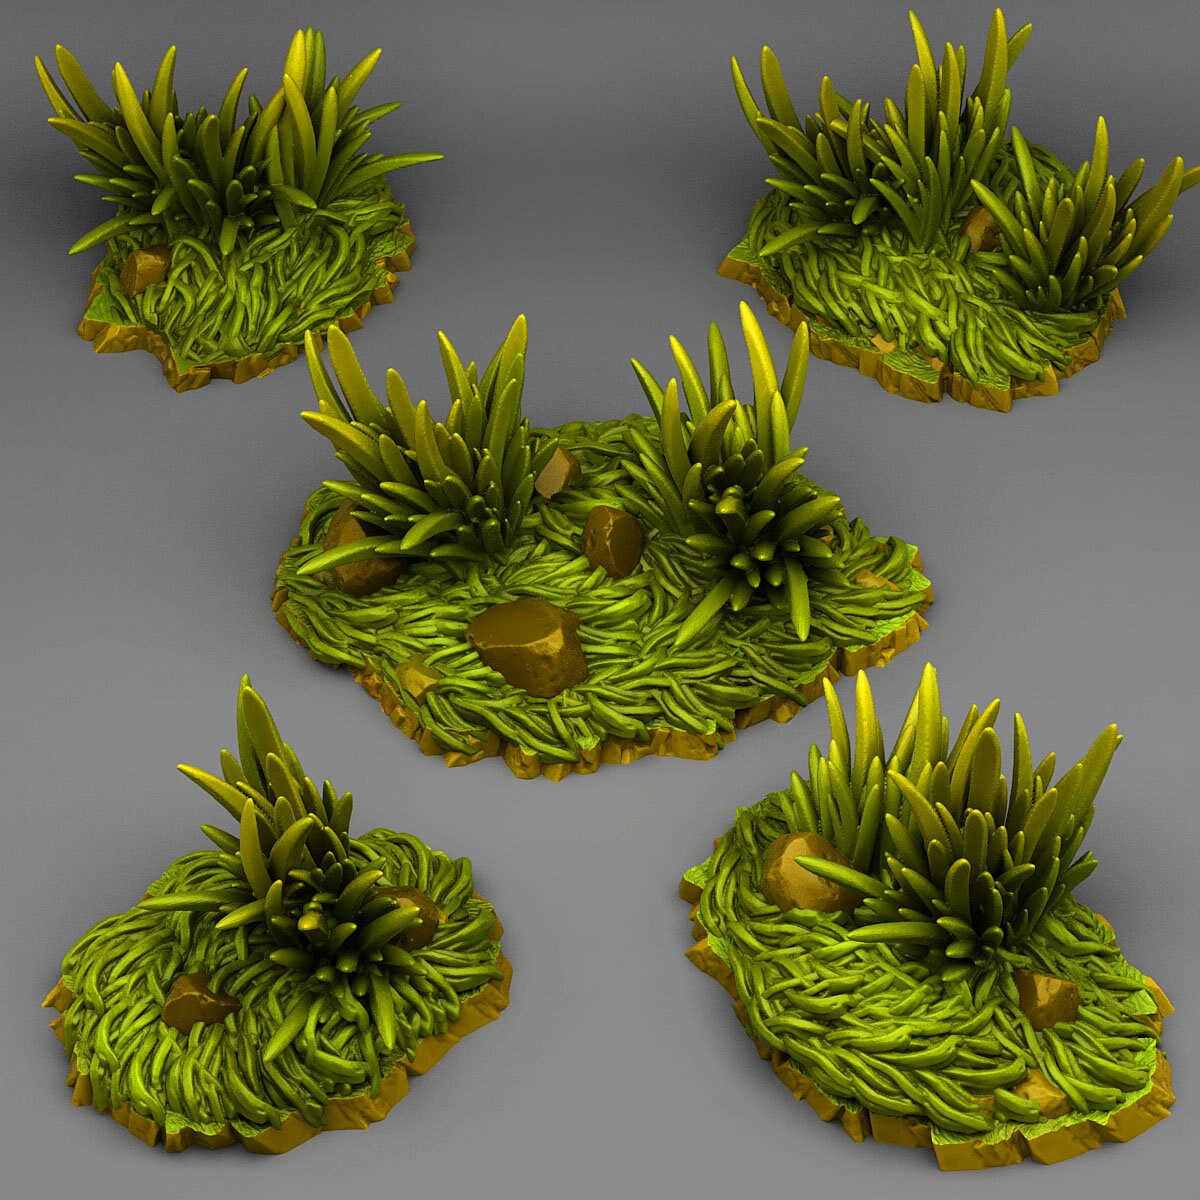 Wild Grass Scatter Terrain - Fantastic Plants and Rocks | Print Your Monsters | DnD | Wargaming